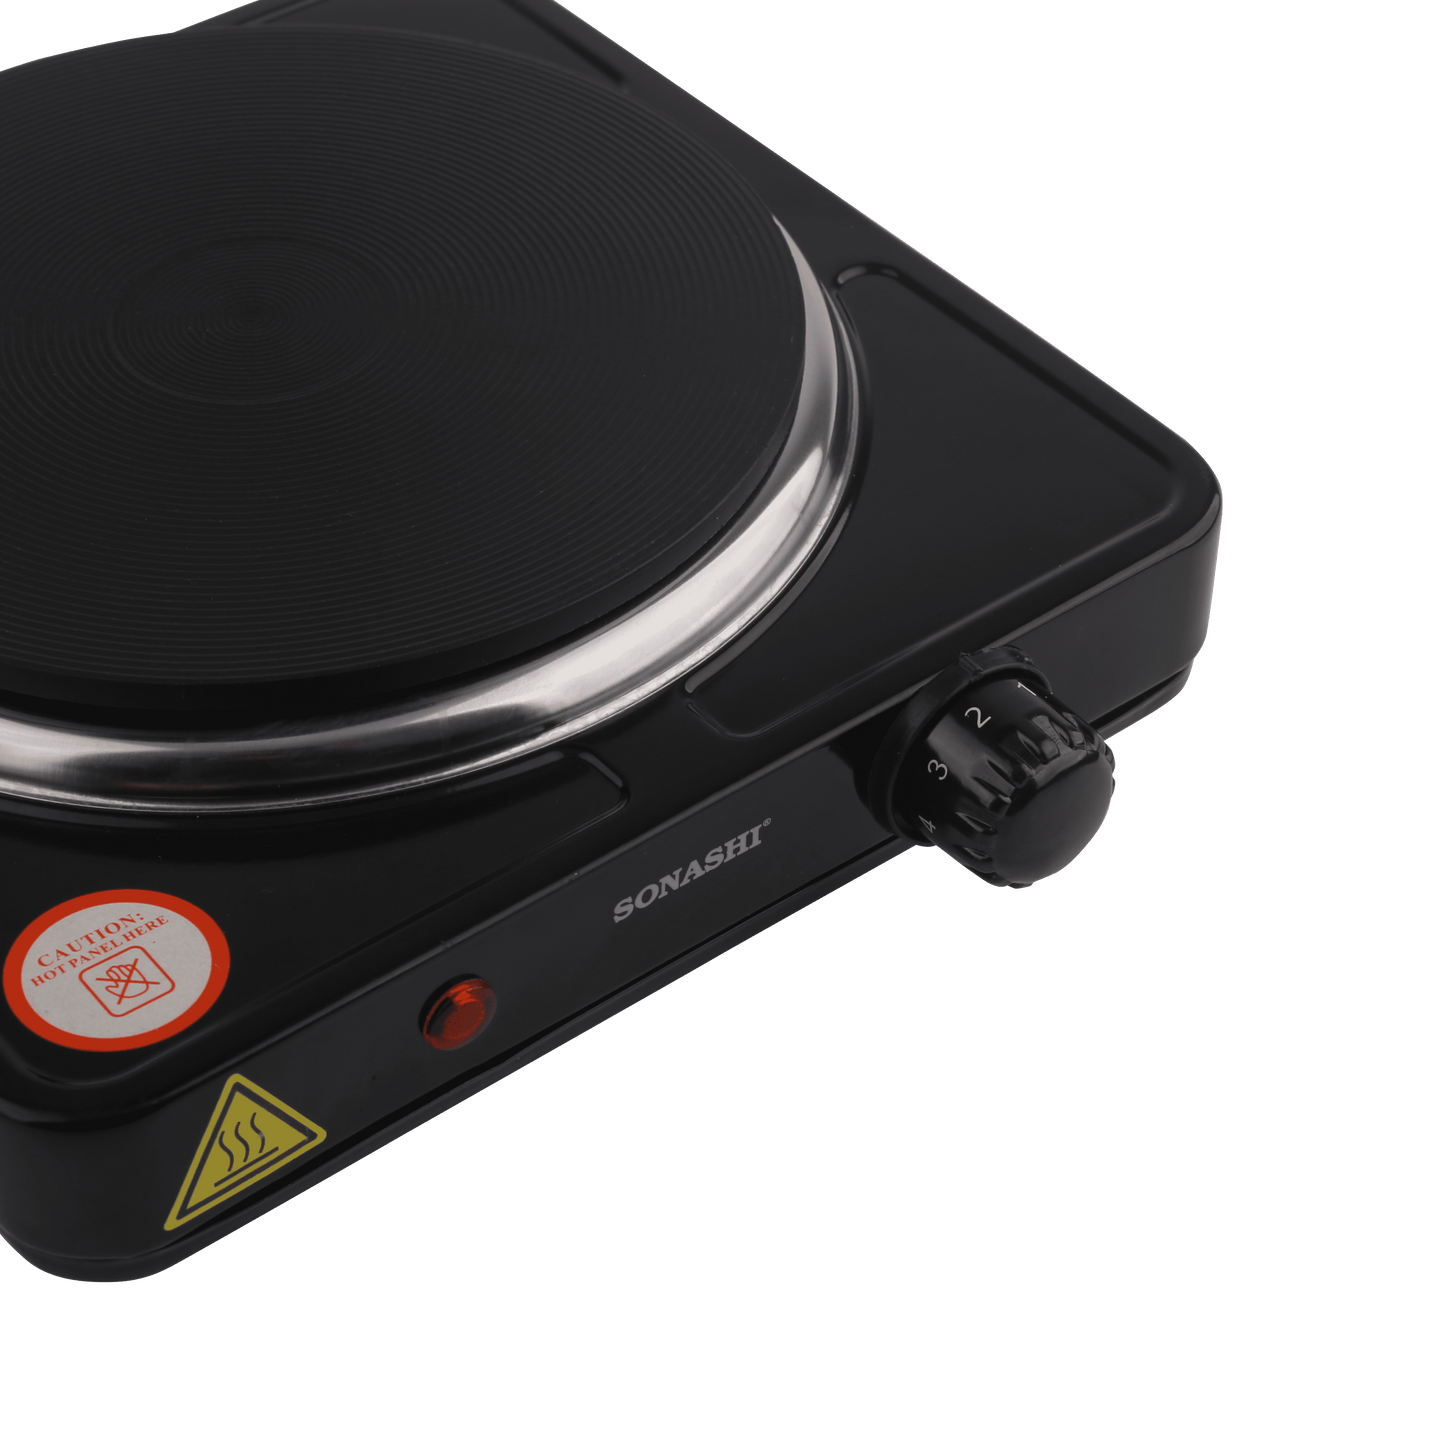 hot plate price